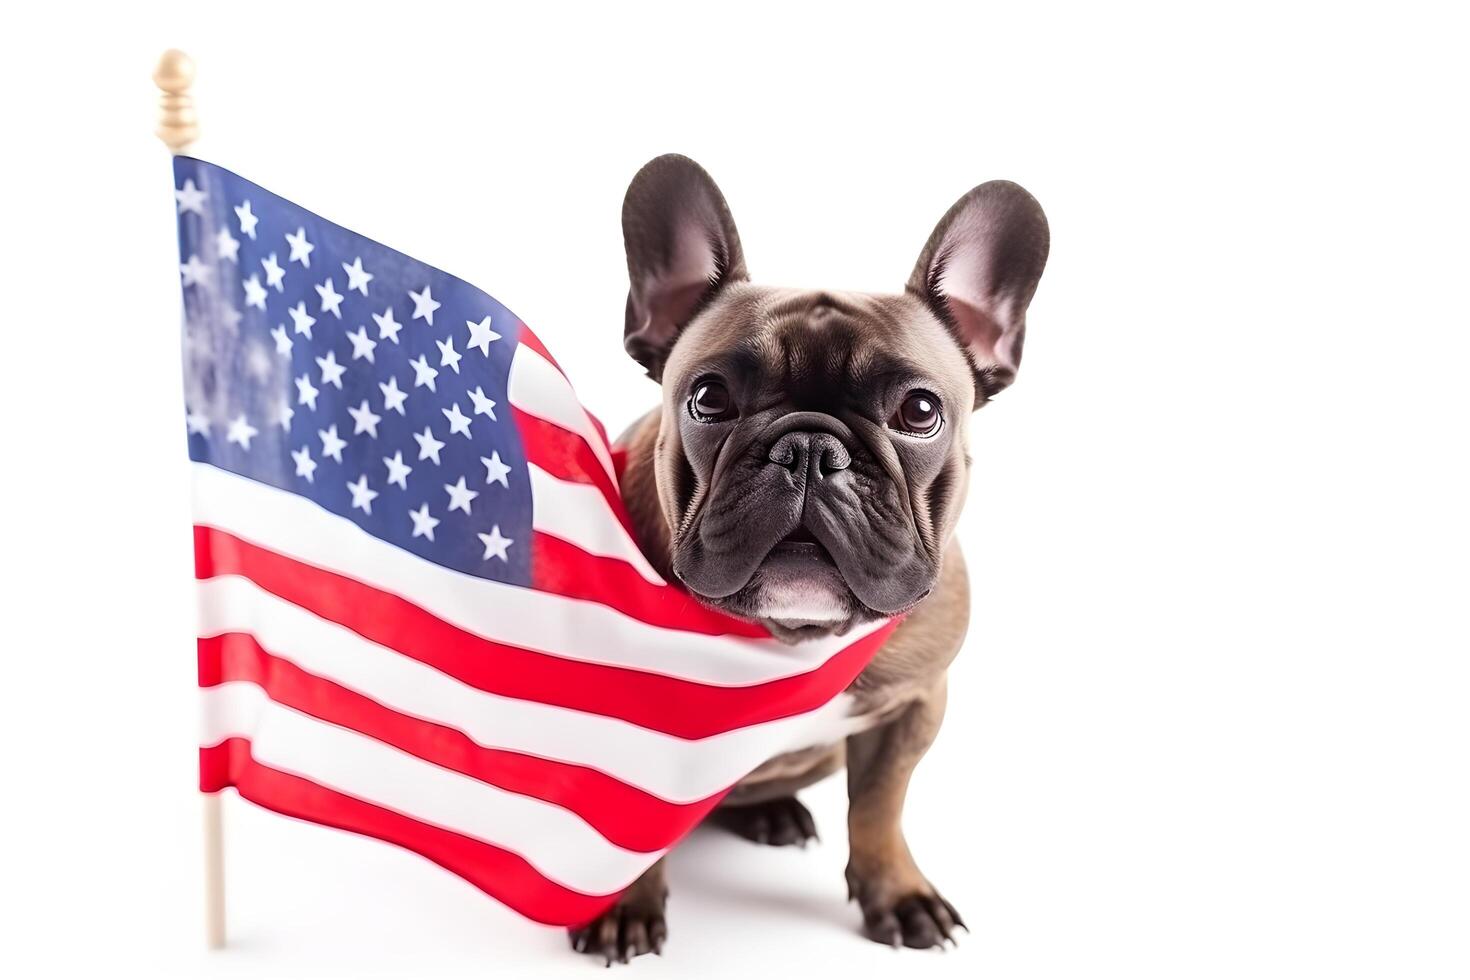 Cute dog puppy enjoying usa independence day with sunglassess and baloons photo